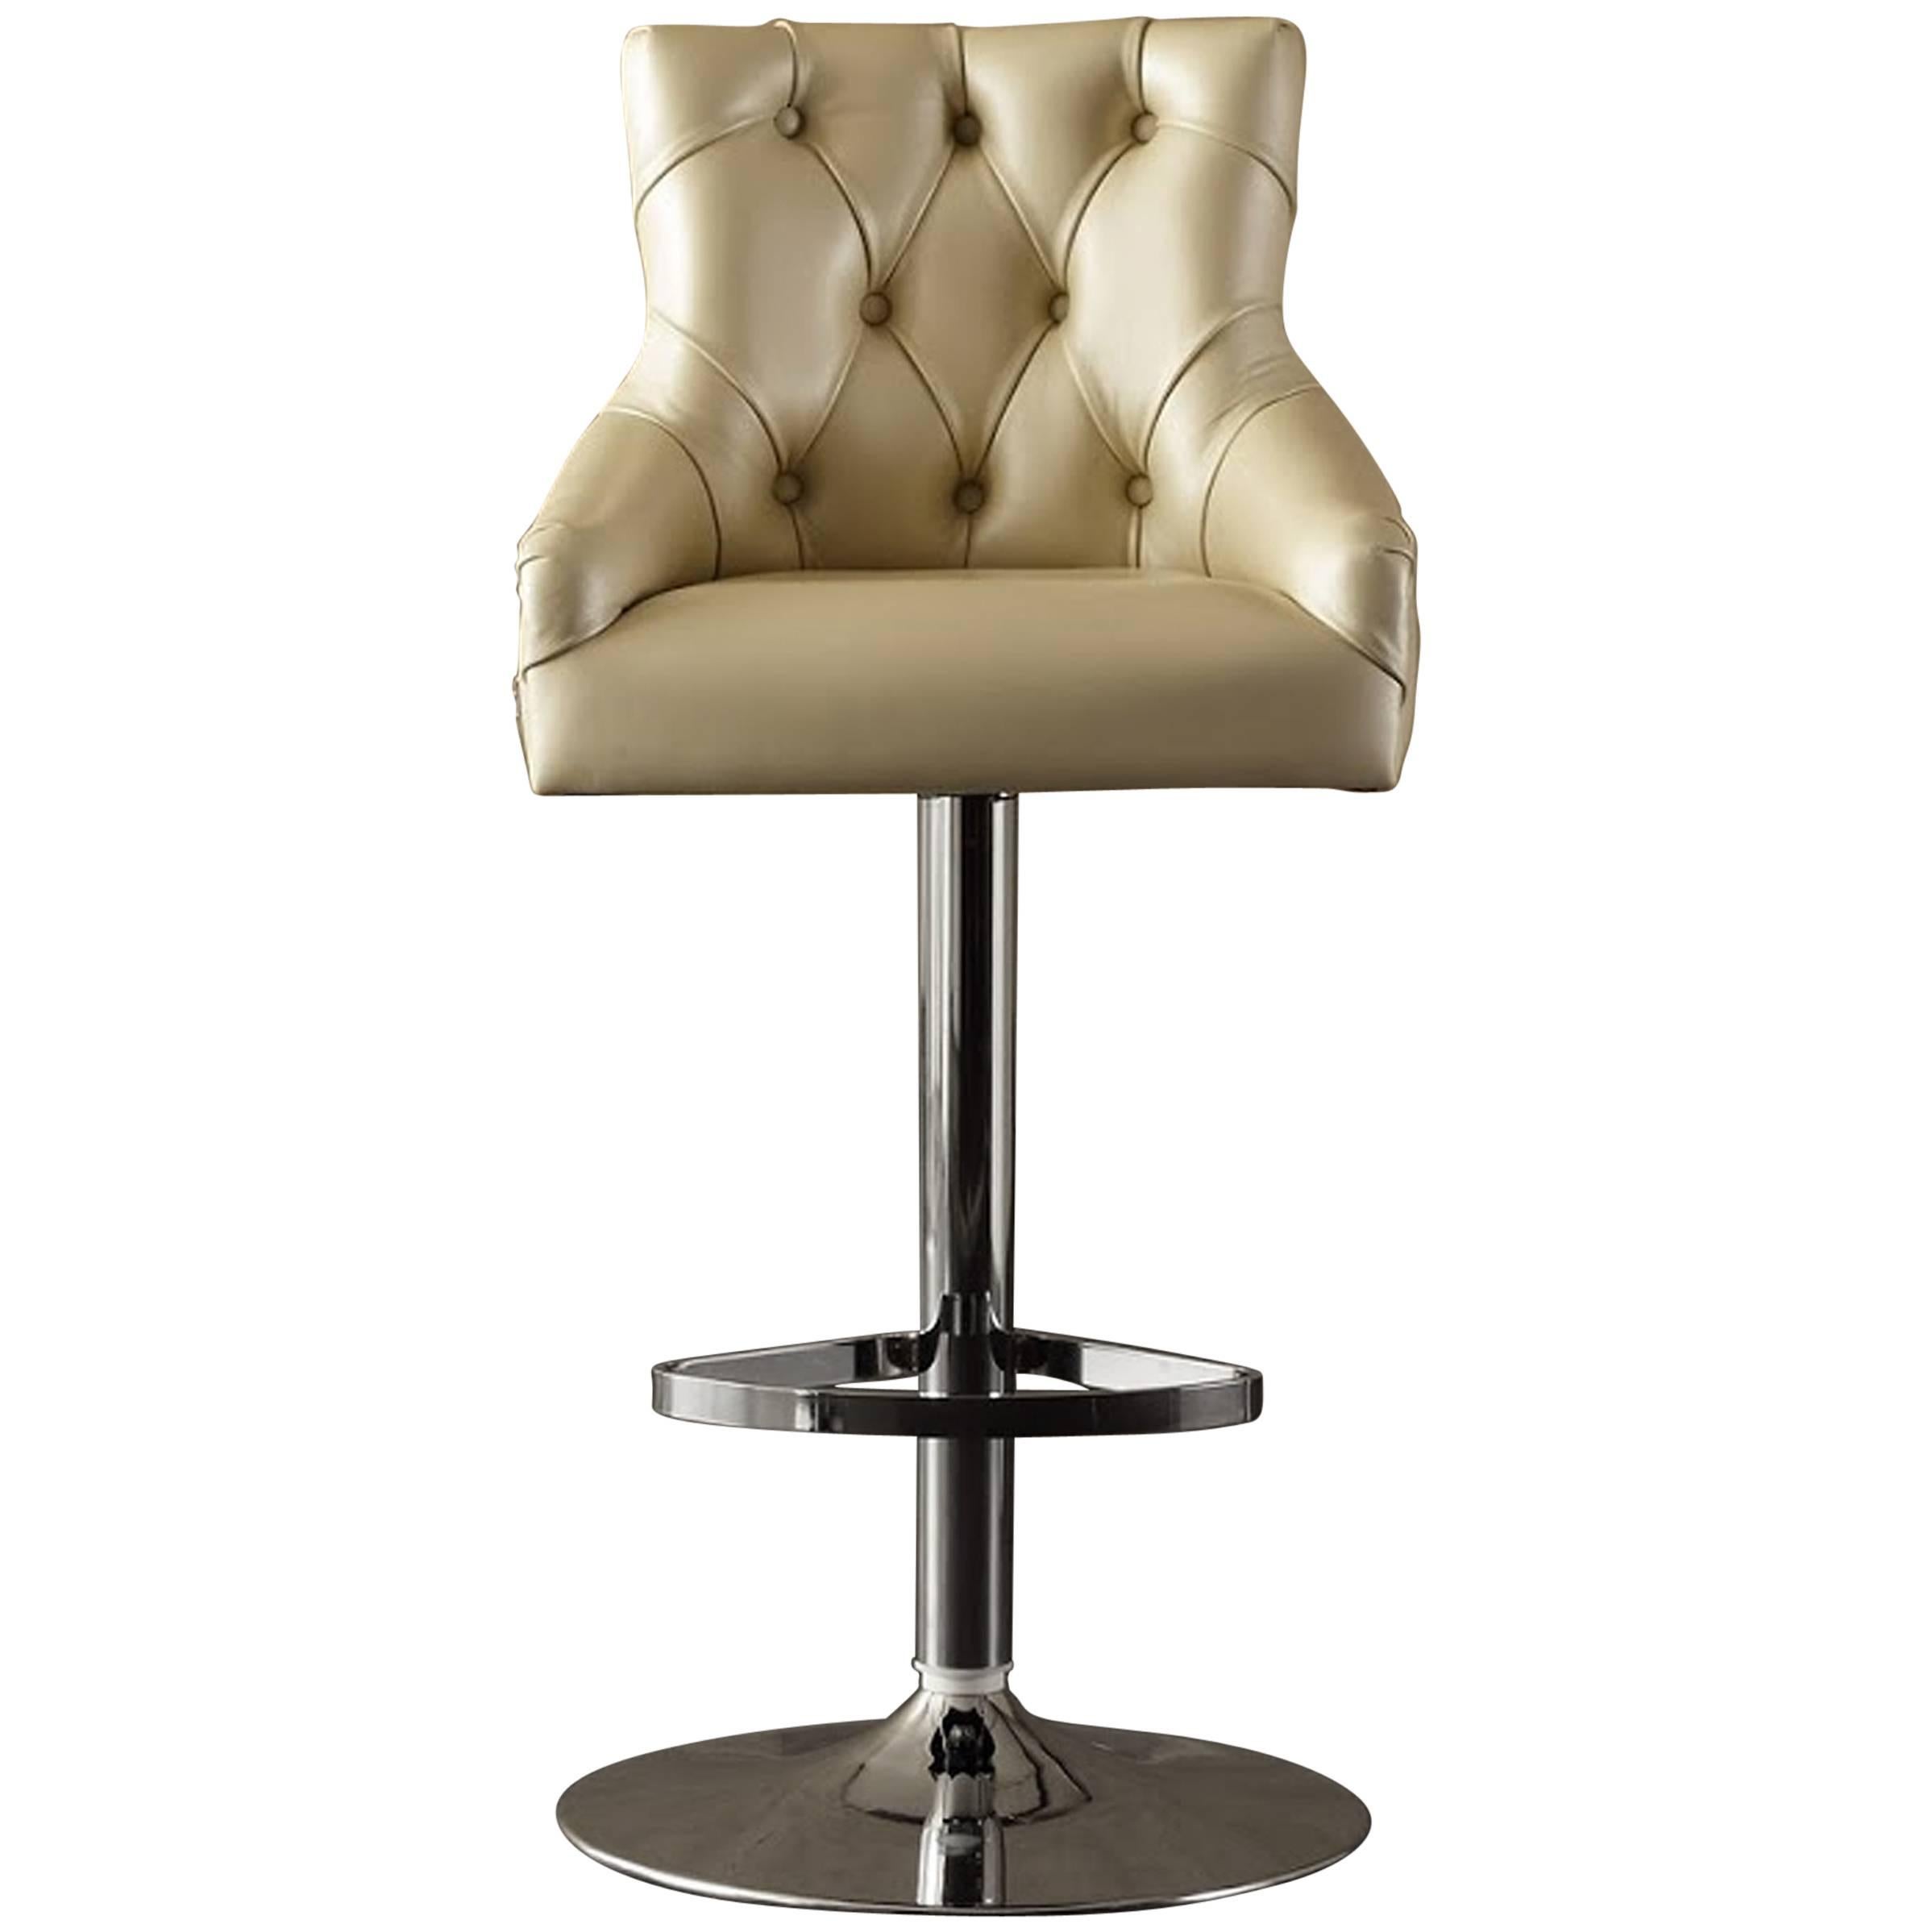 Catana Bar Stool in Polished Steel with Leather seat 